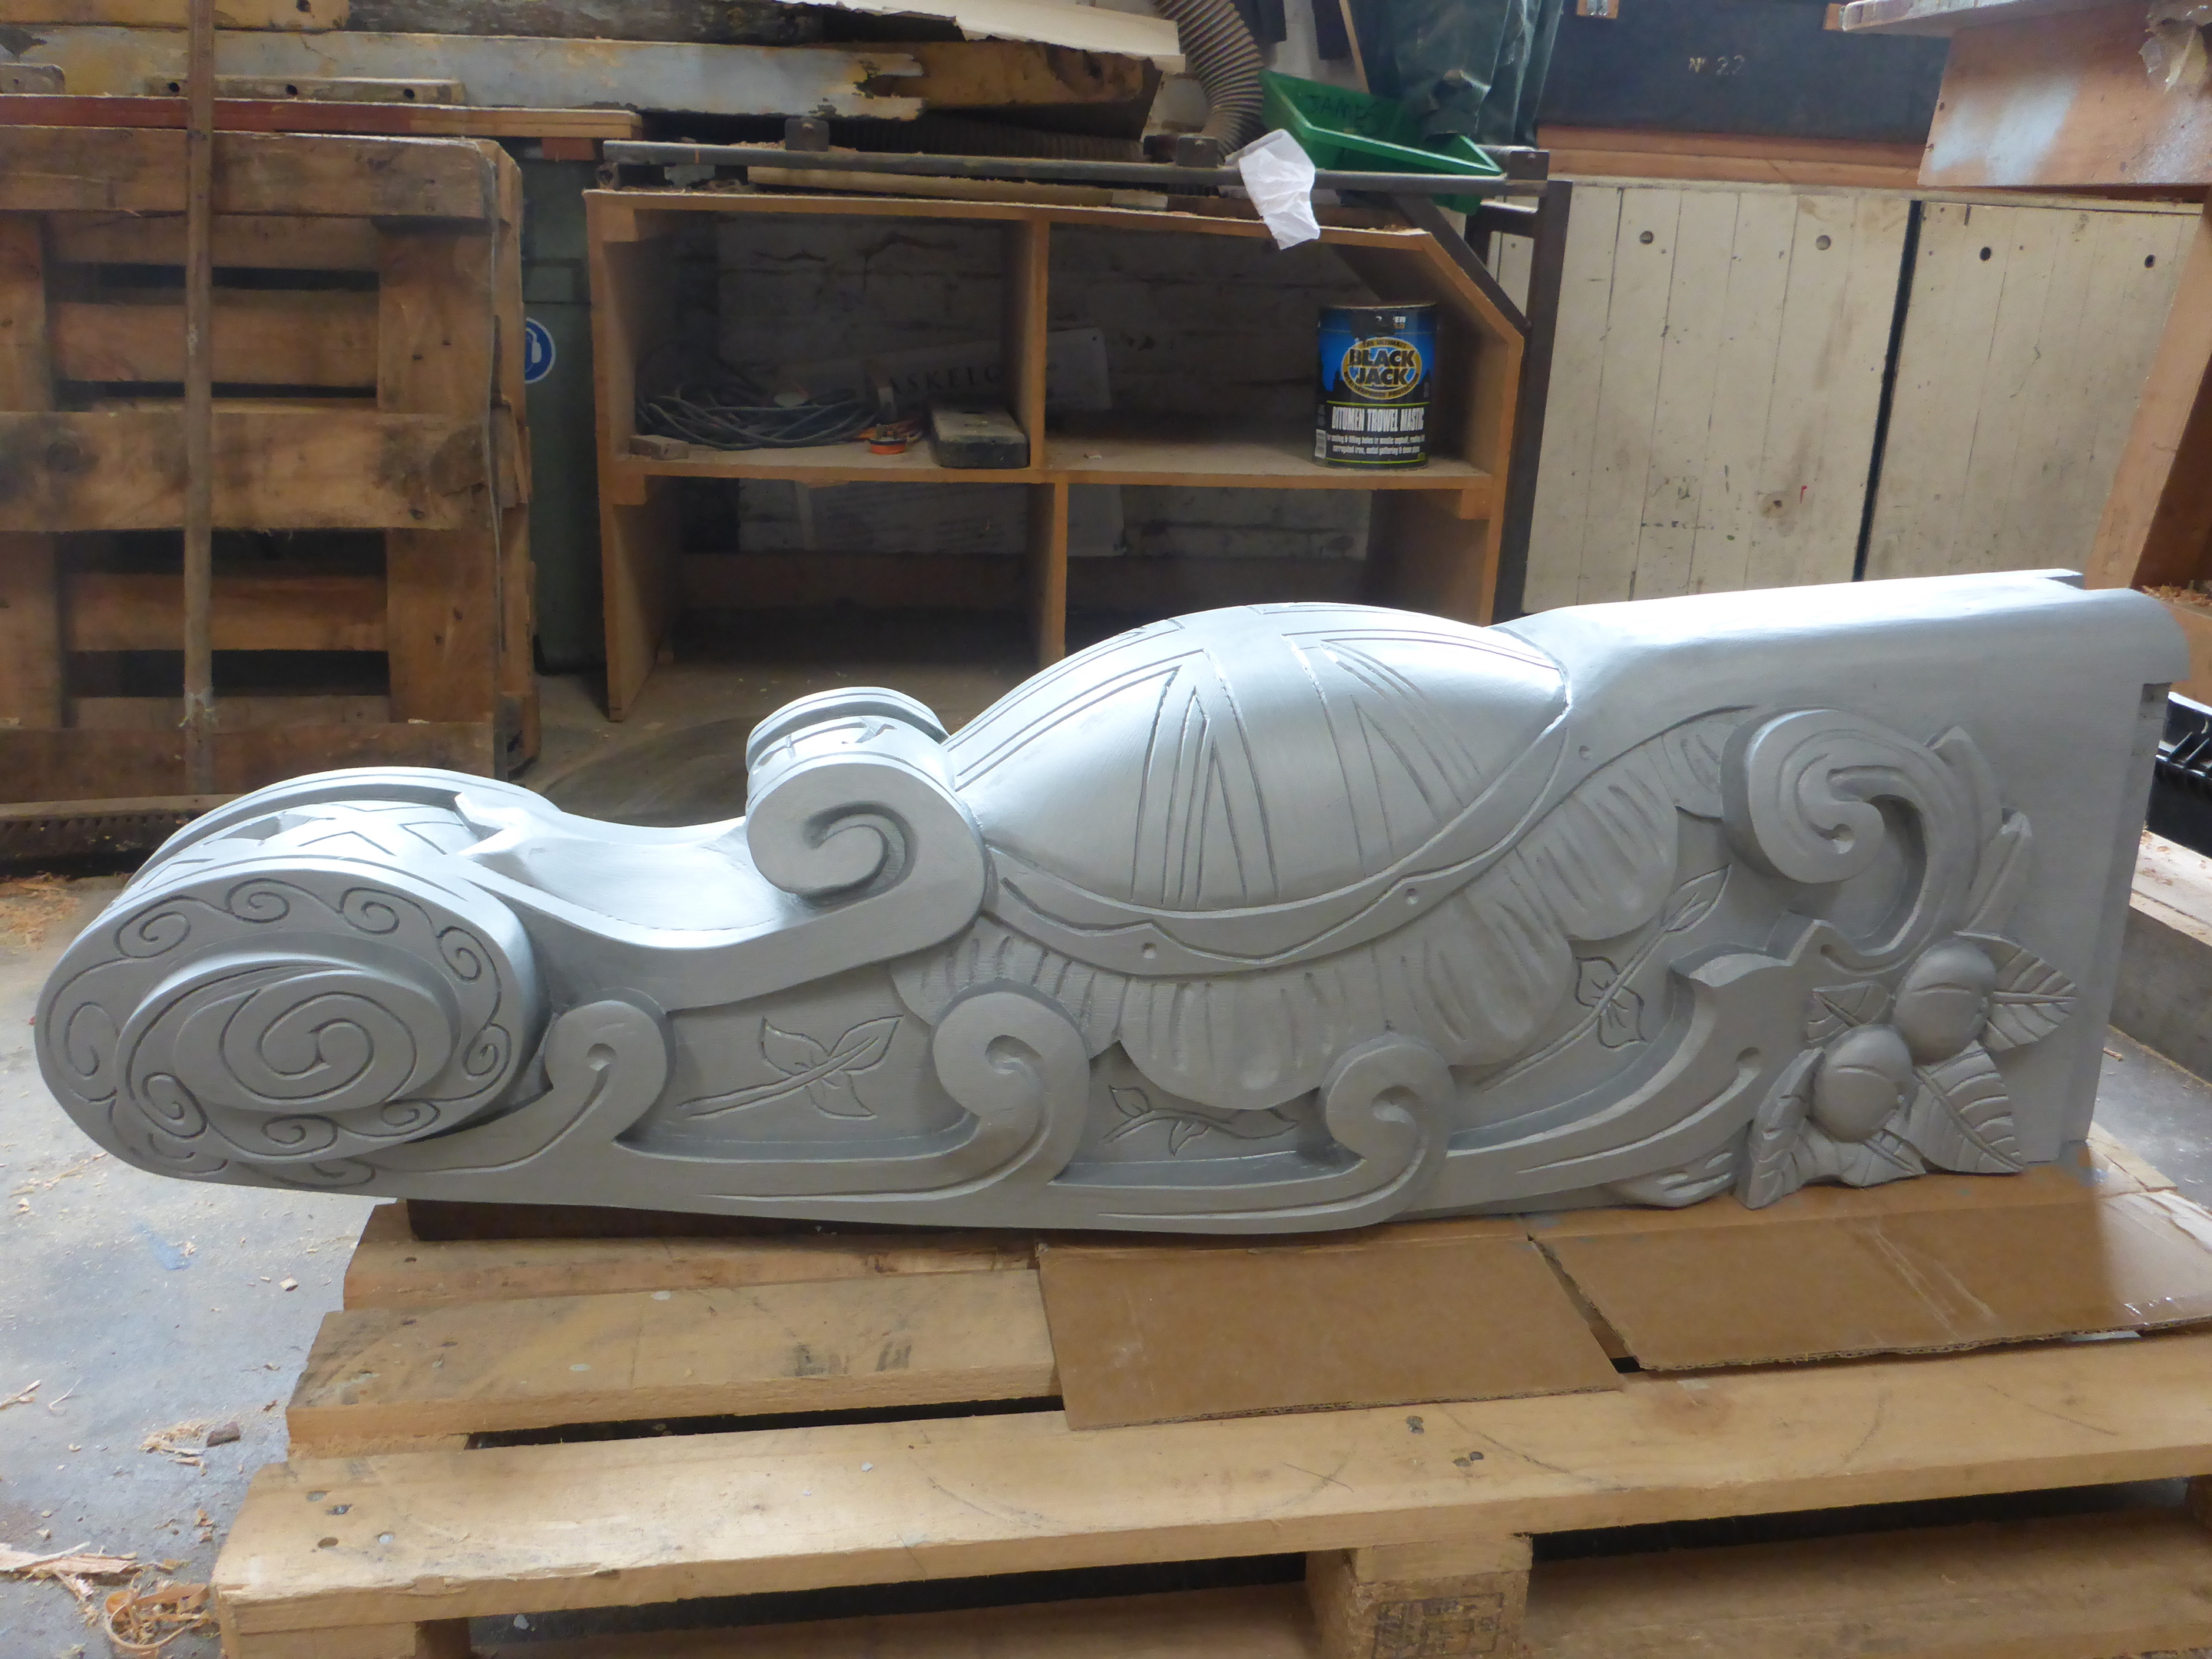 The completed Figurehead, ready to be transported to Dundee for painting.